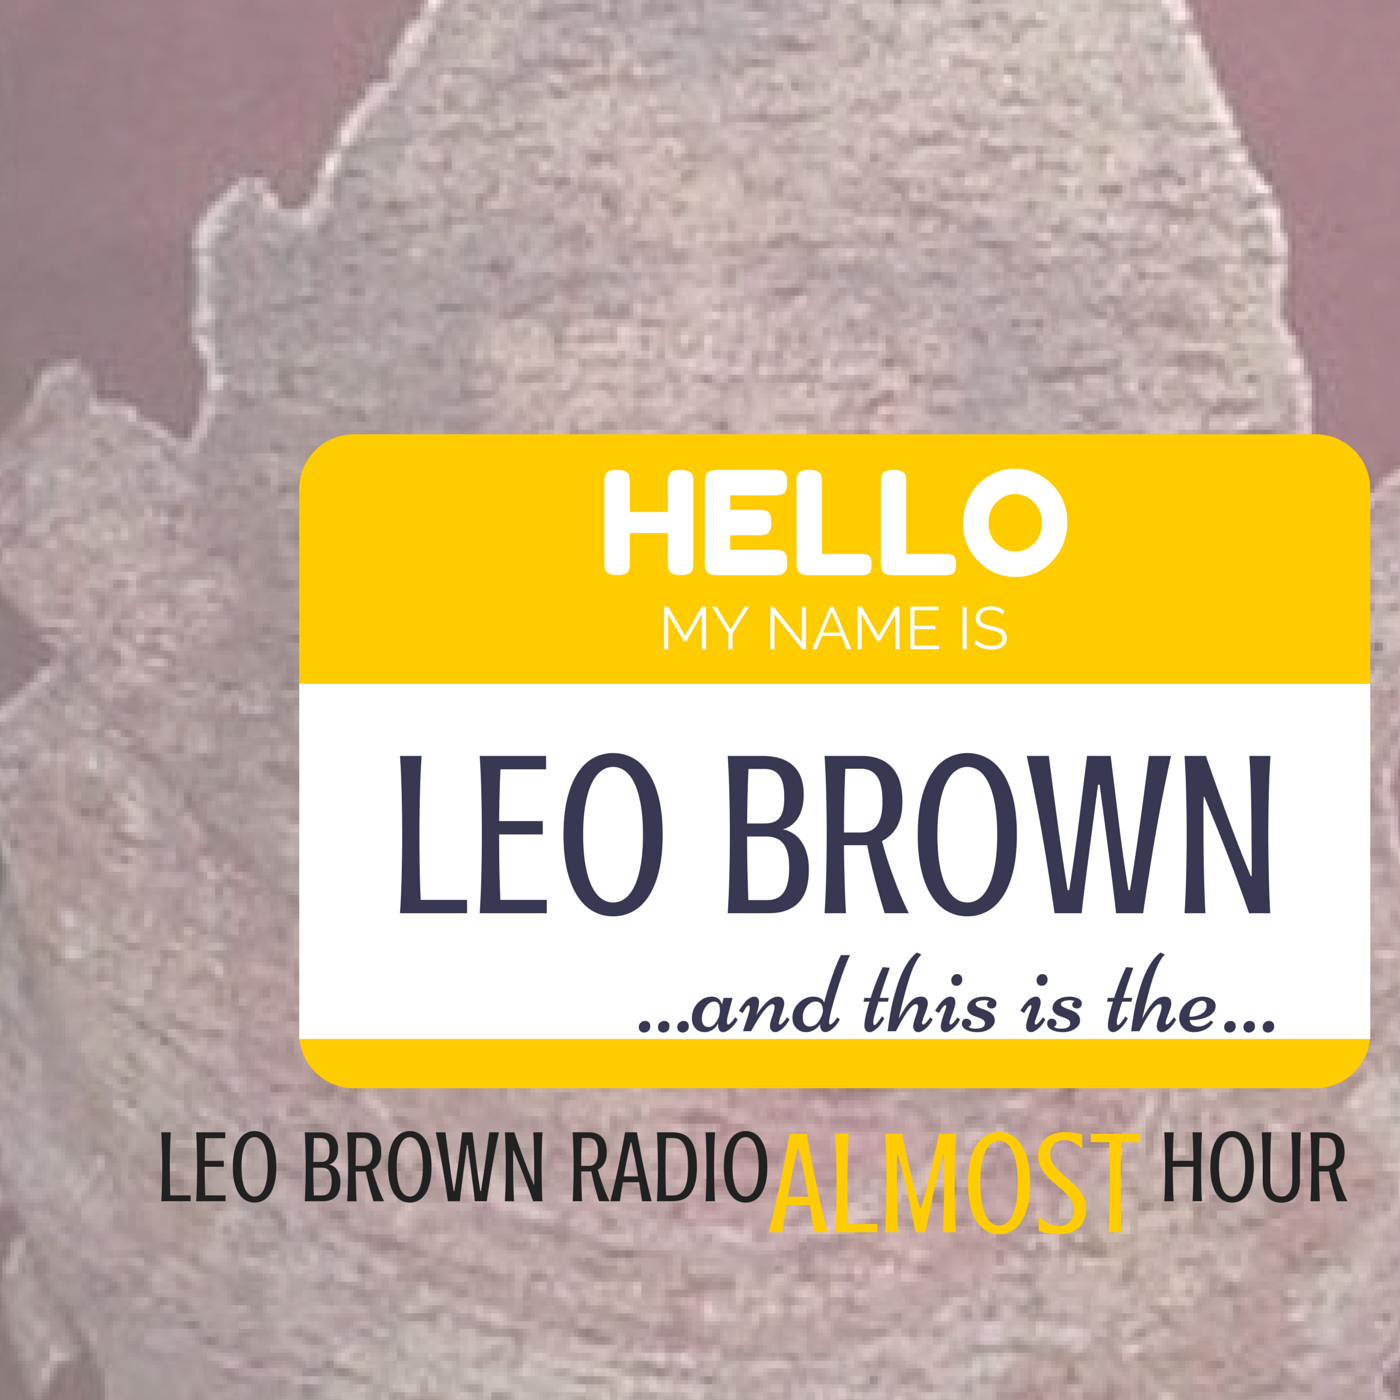 Leo Brown Almost Hour 02/15/17